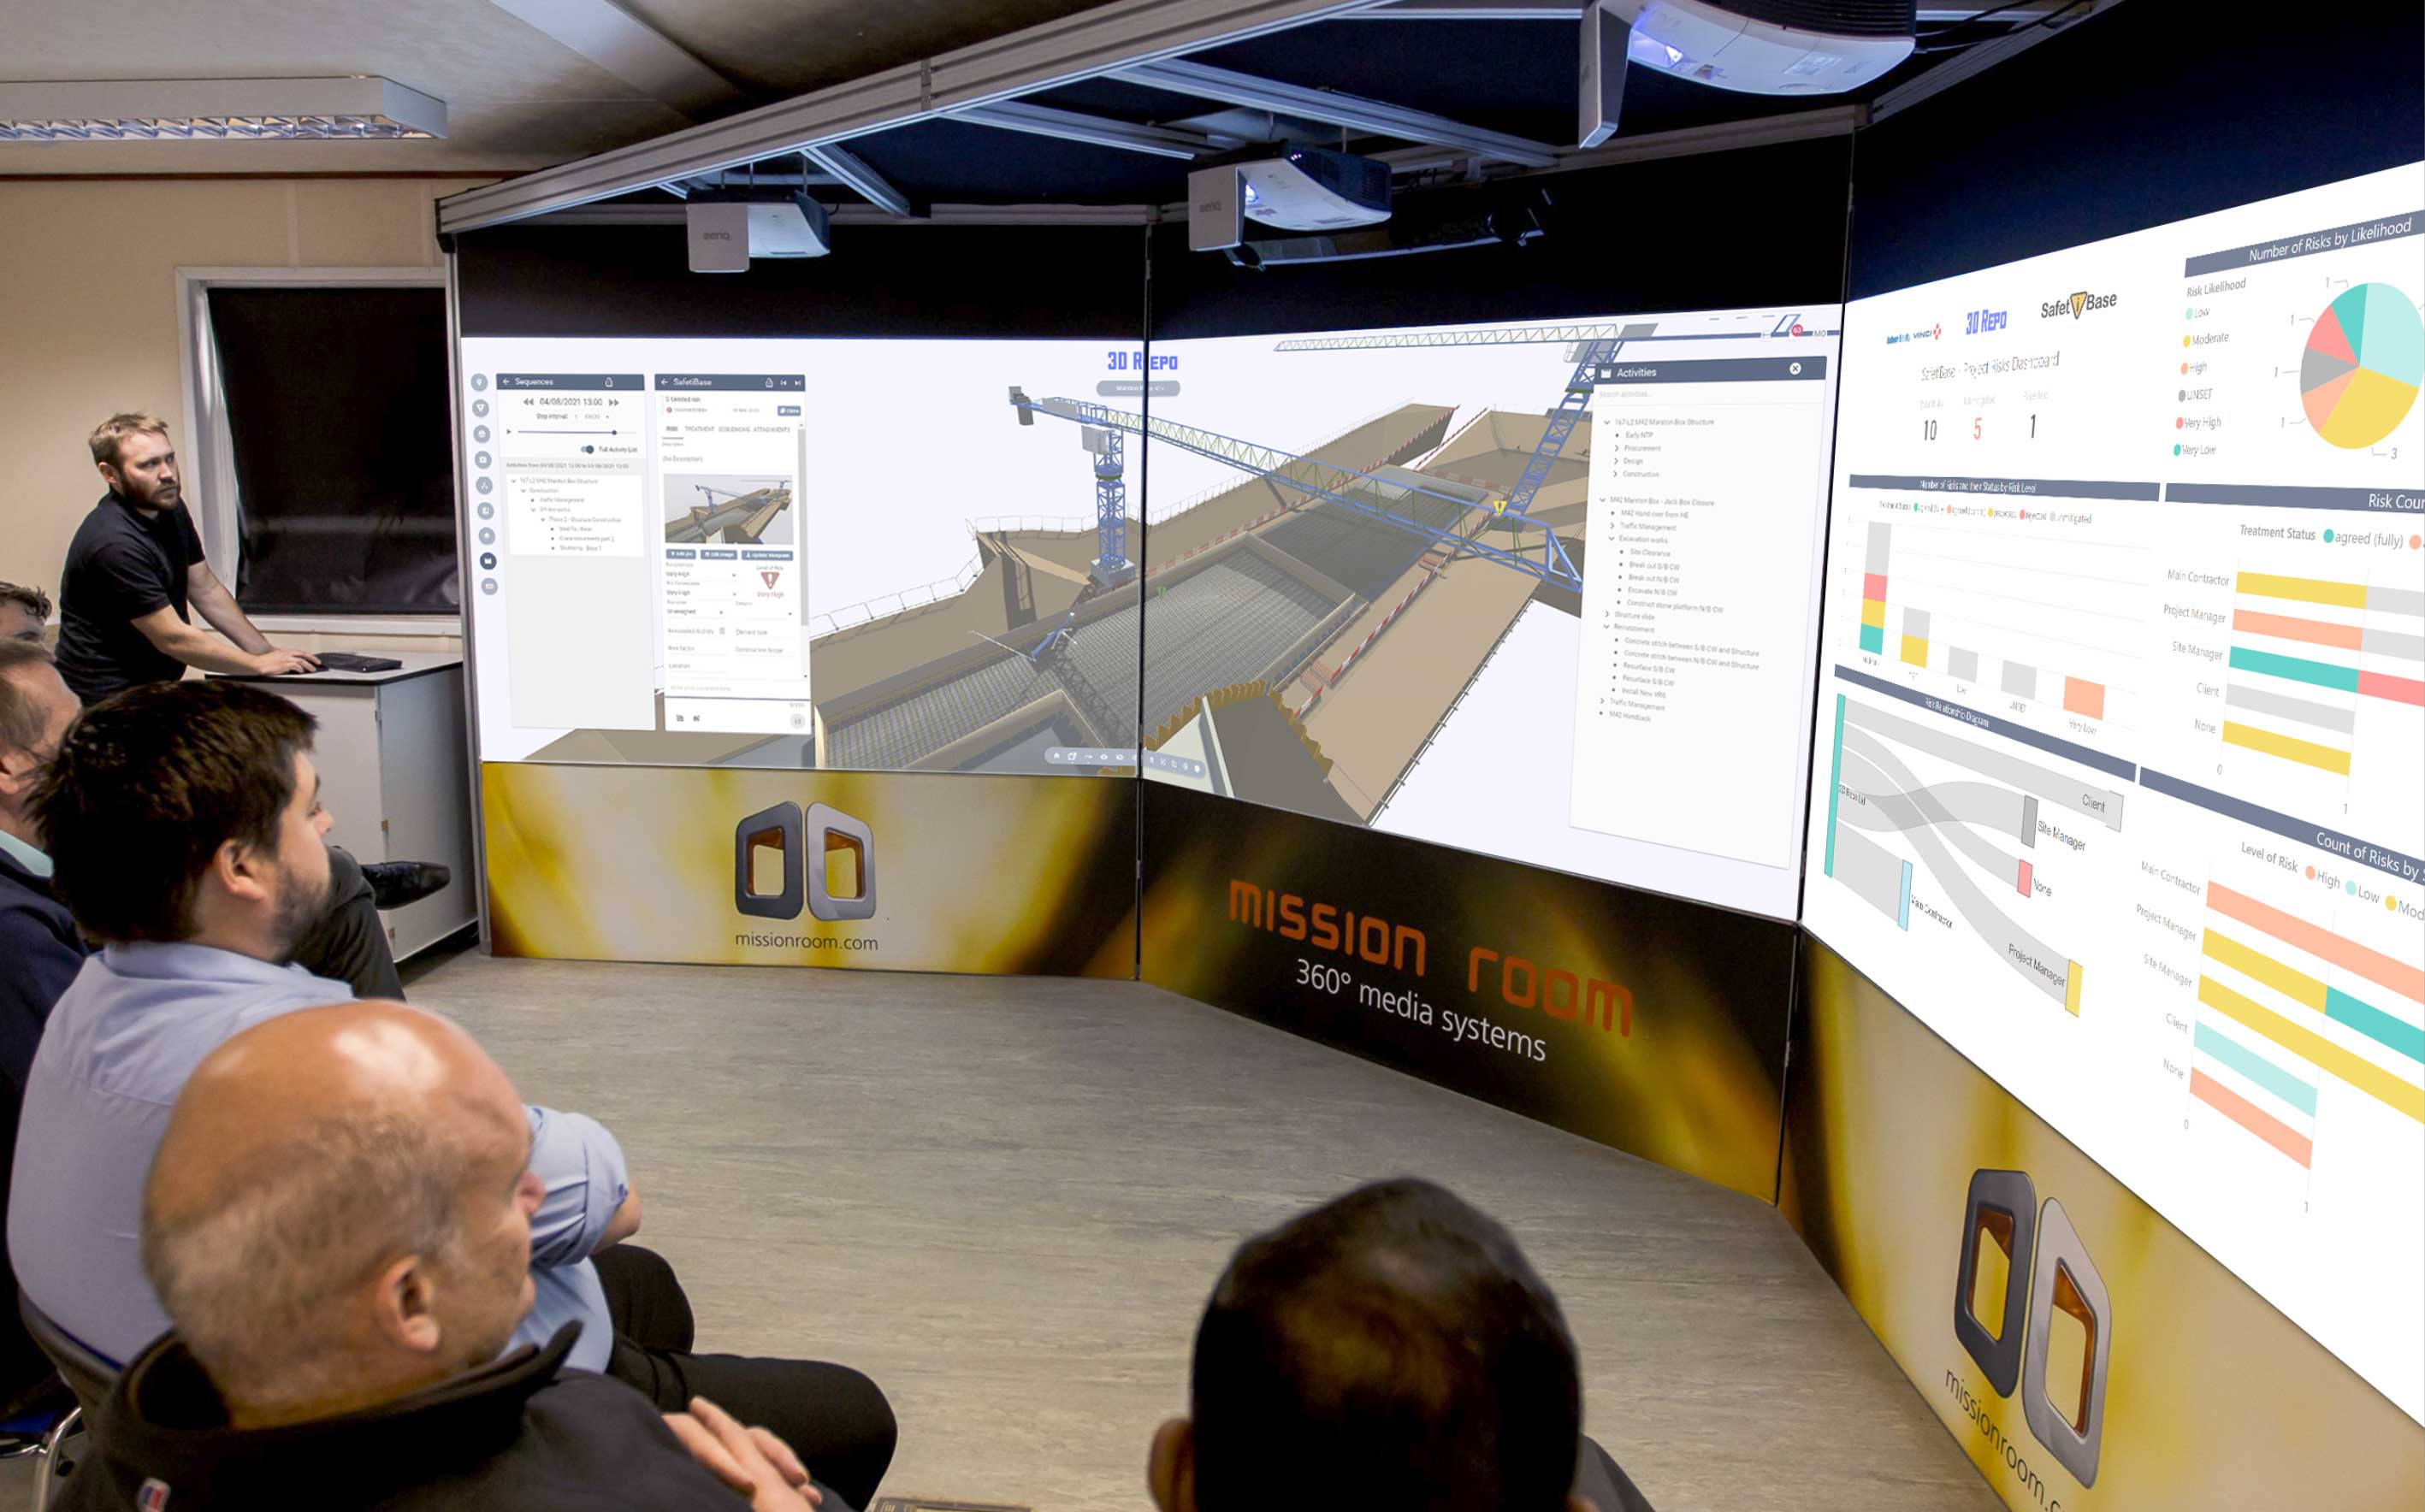 3D Repo integrates with many other solutions such as Mission Room to make planning and identifying issues and risks even more collaborative.